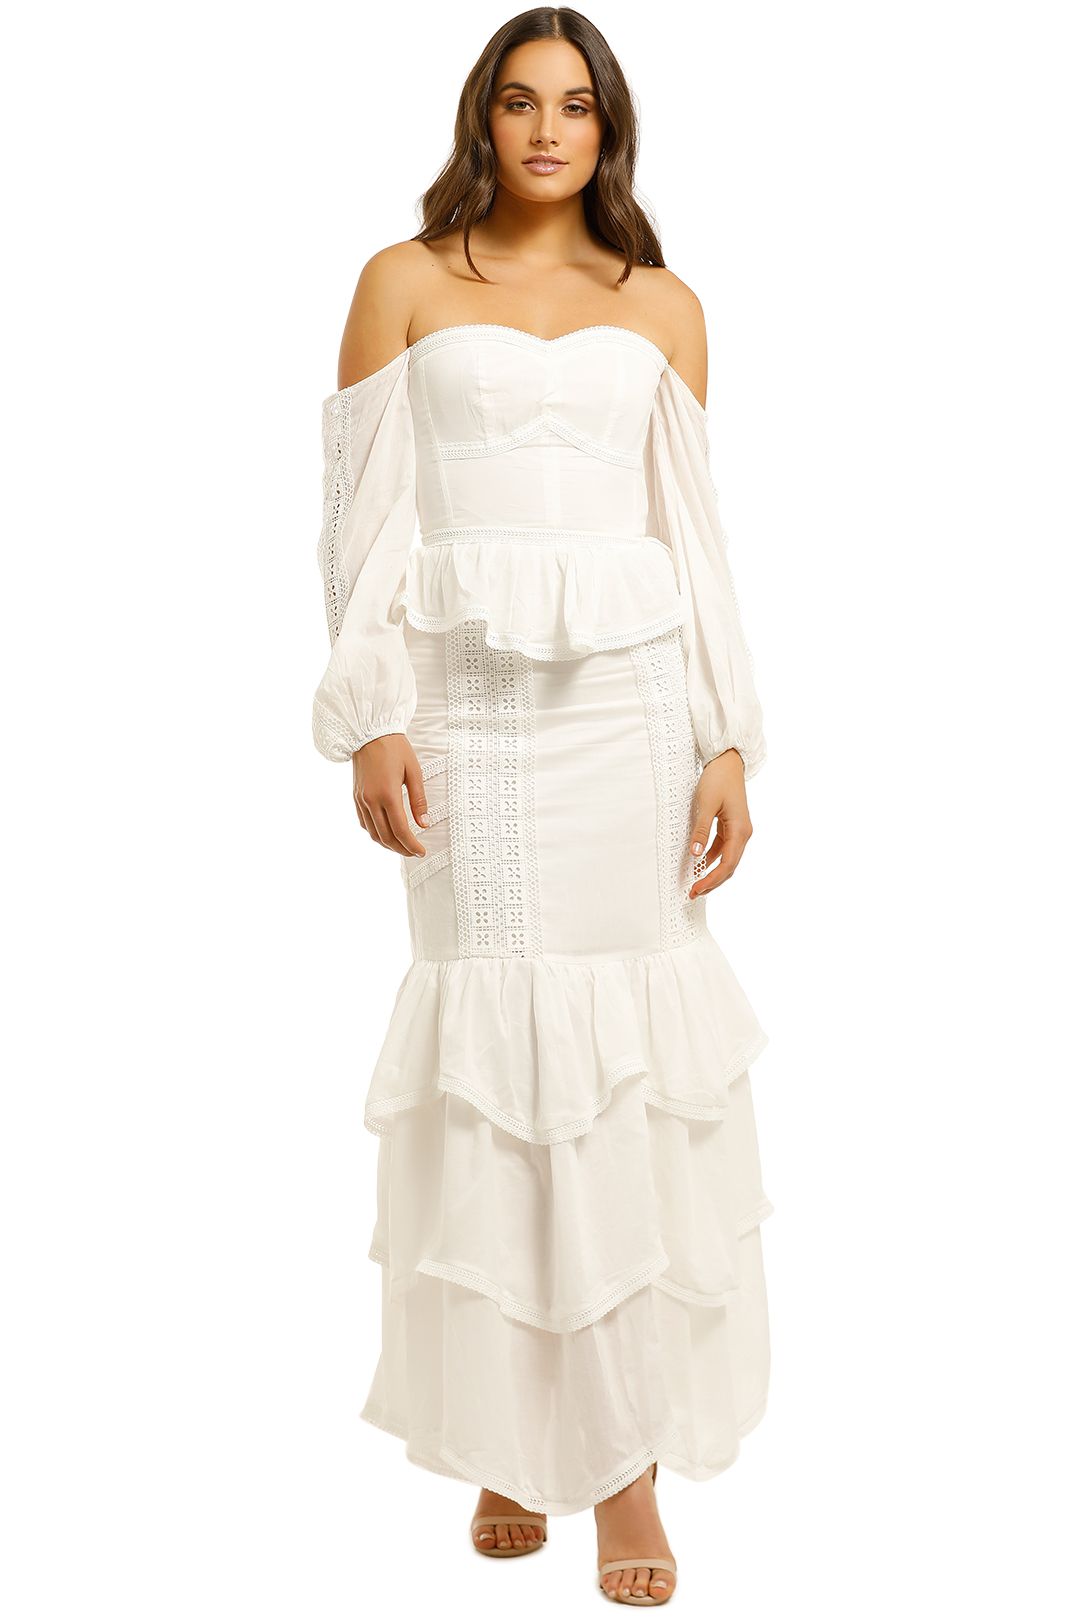 We-Are-Kindred-Sorrento-Bustier-Top-and-Skirt-Set-Ivory-Side